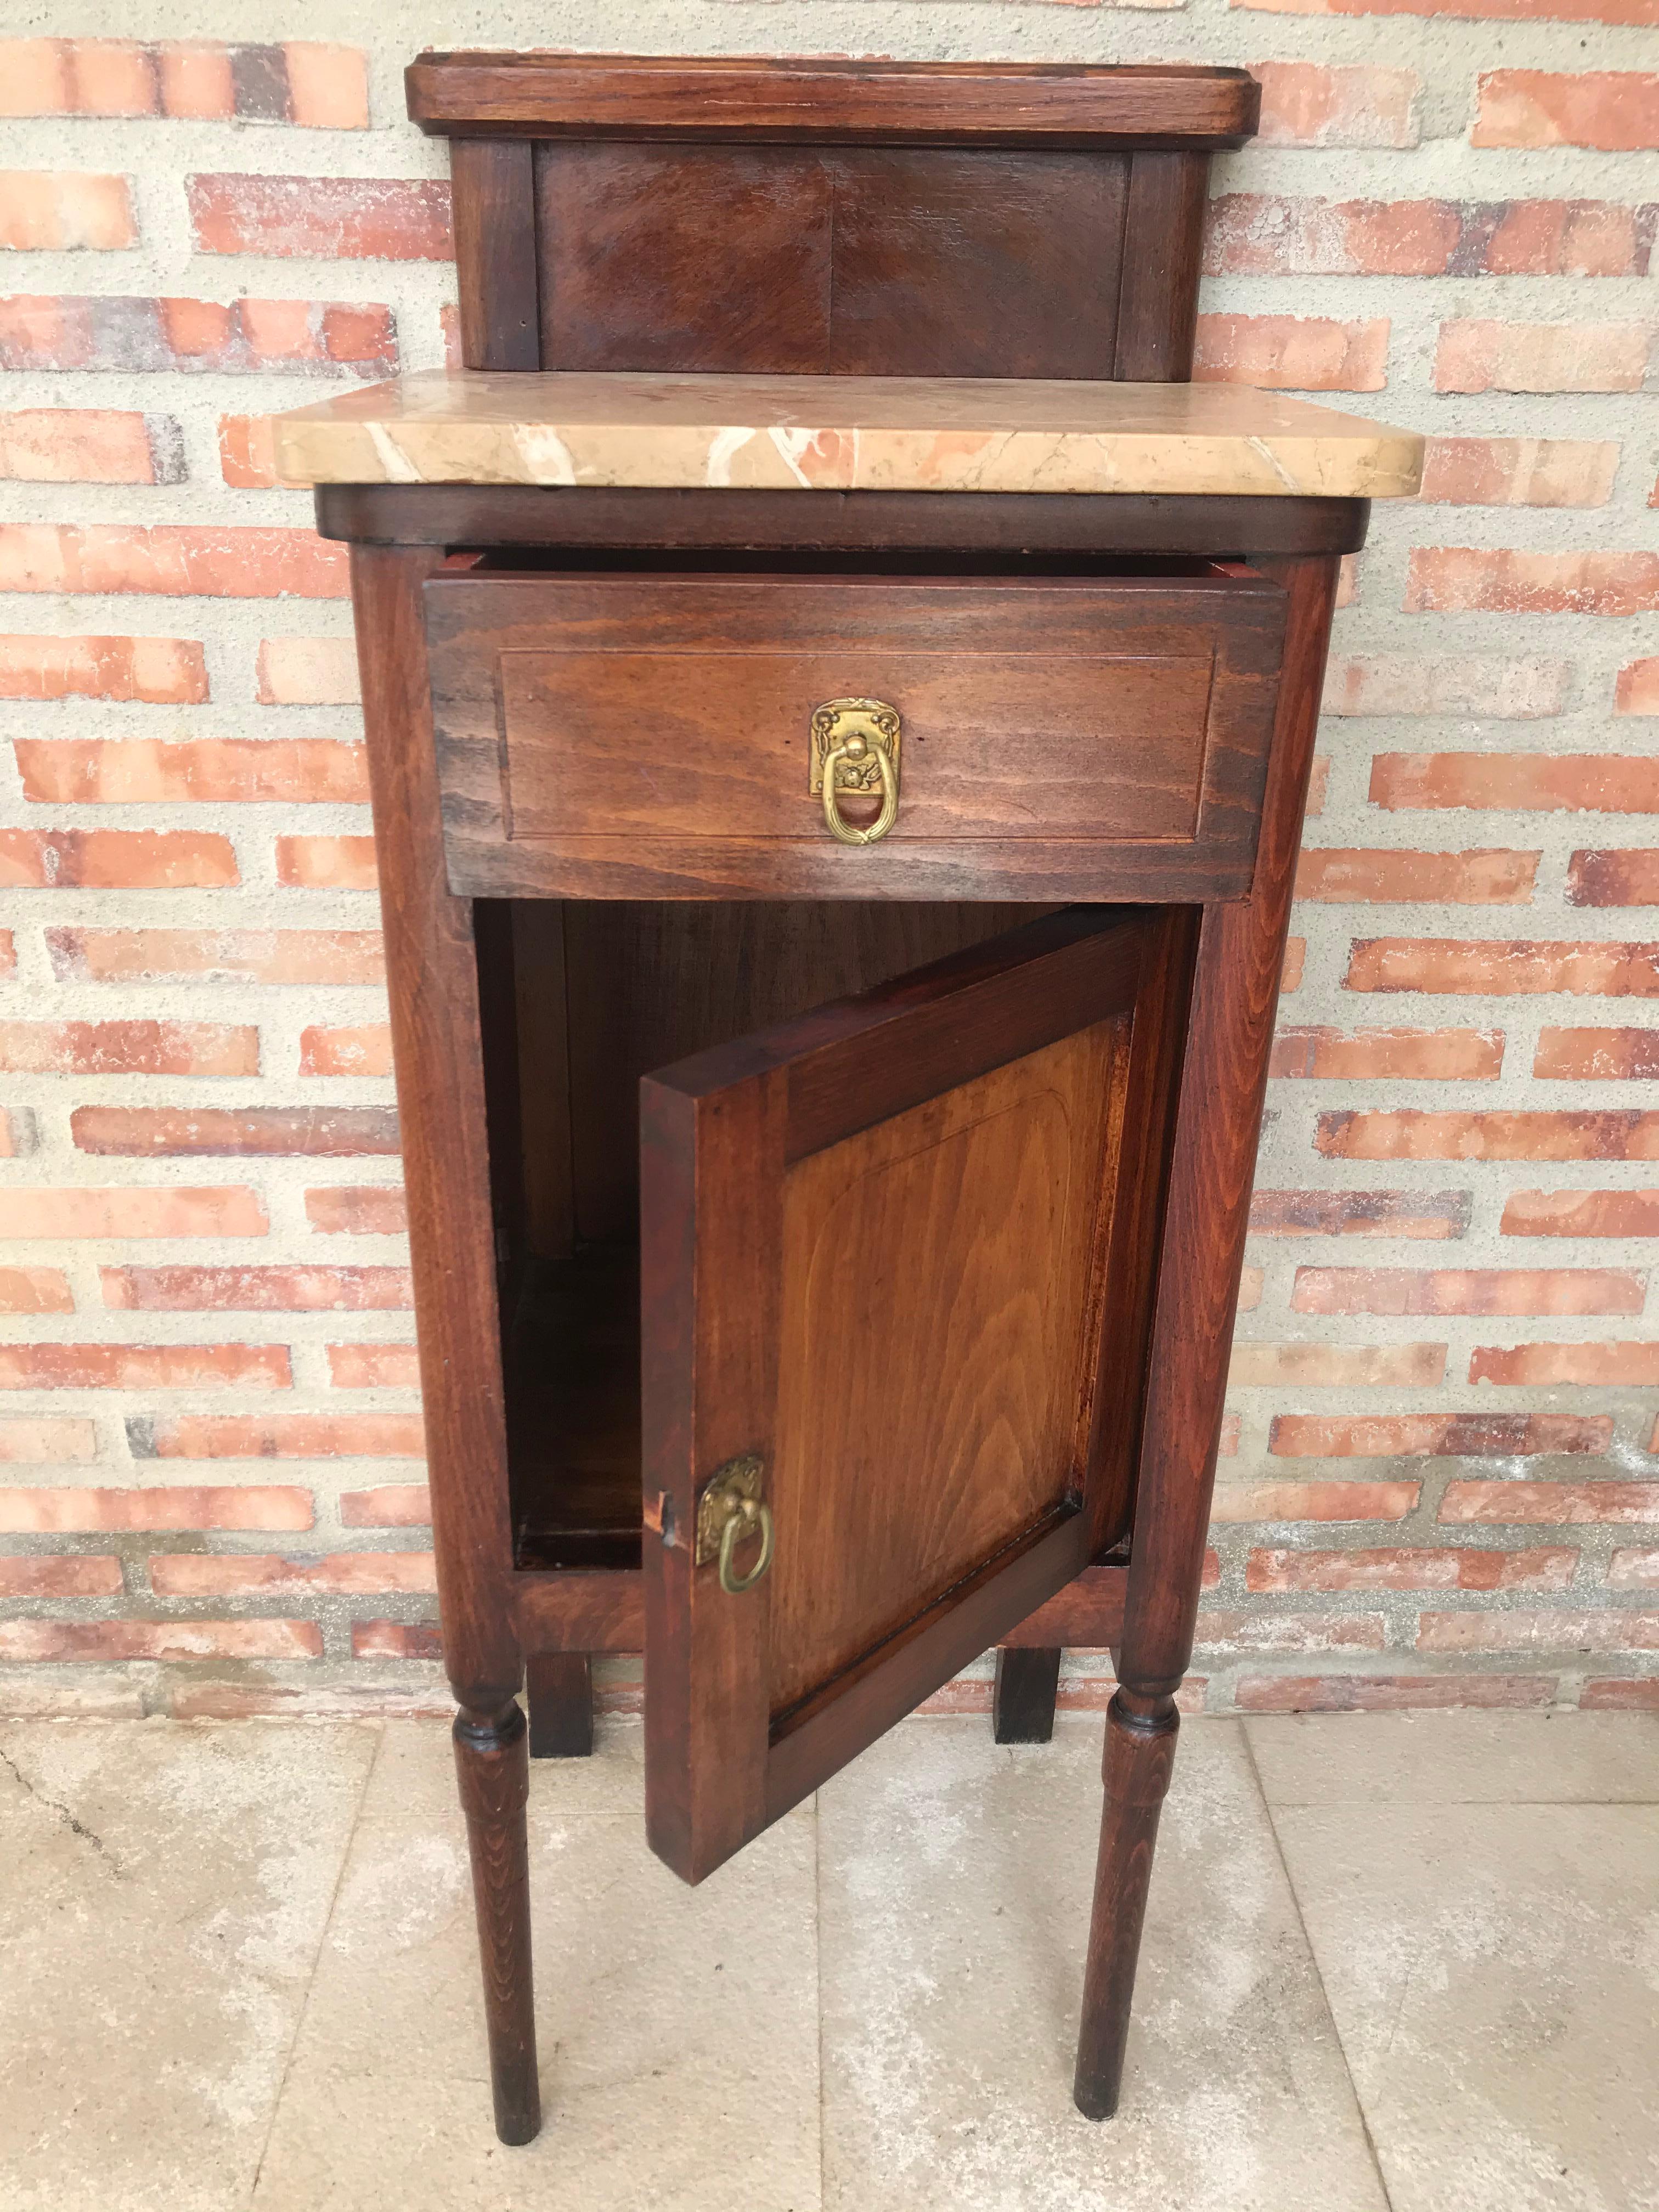 Modern Art Nouveau Walnut Nightstand with Crest, Marble Top and Glass Shelve For Sale